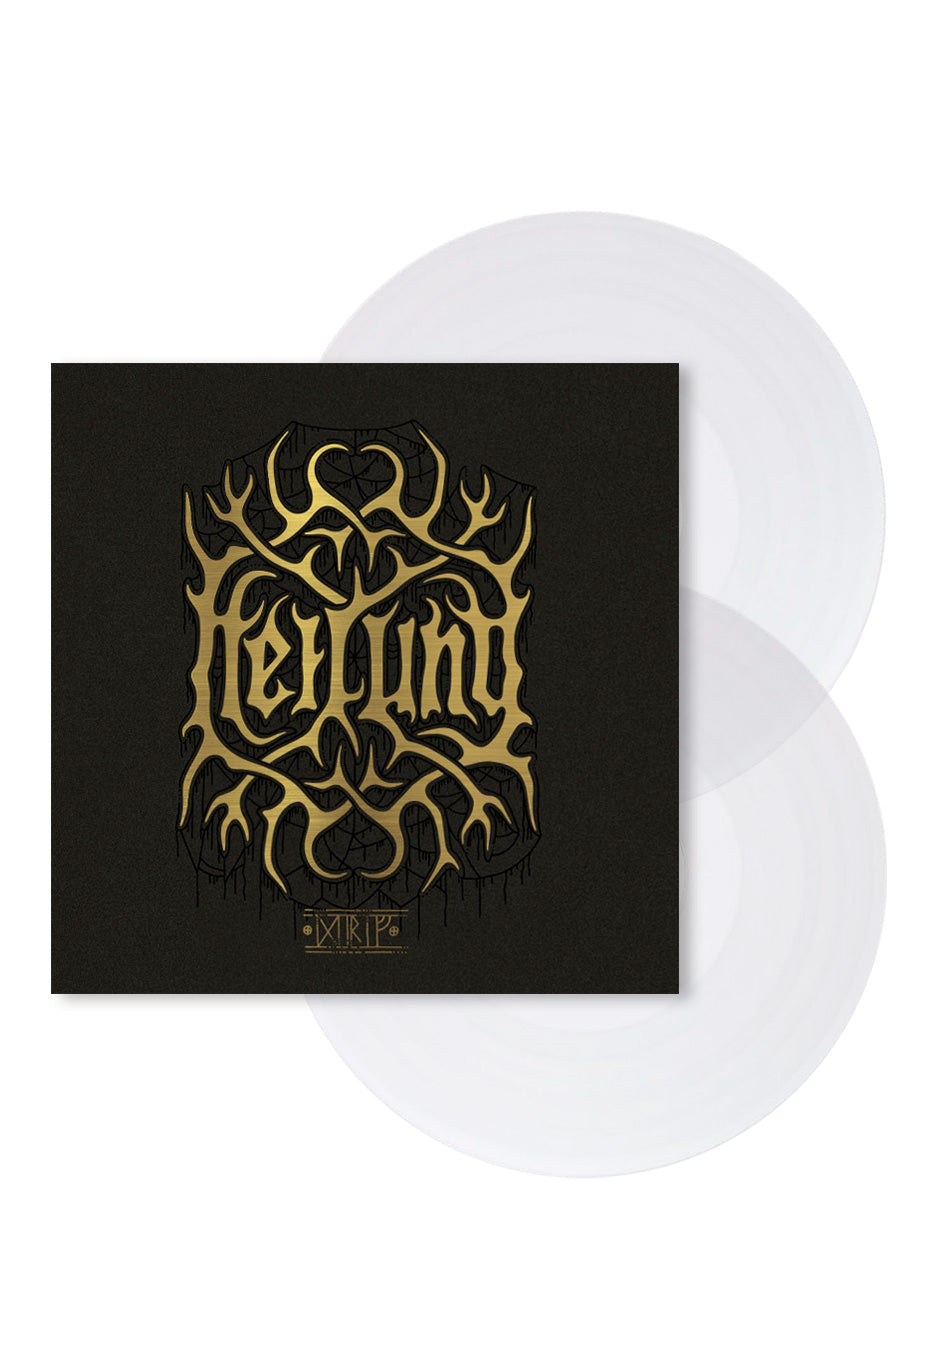 Heilung - Drif Crystal Clear - Colored 2 Vinyl